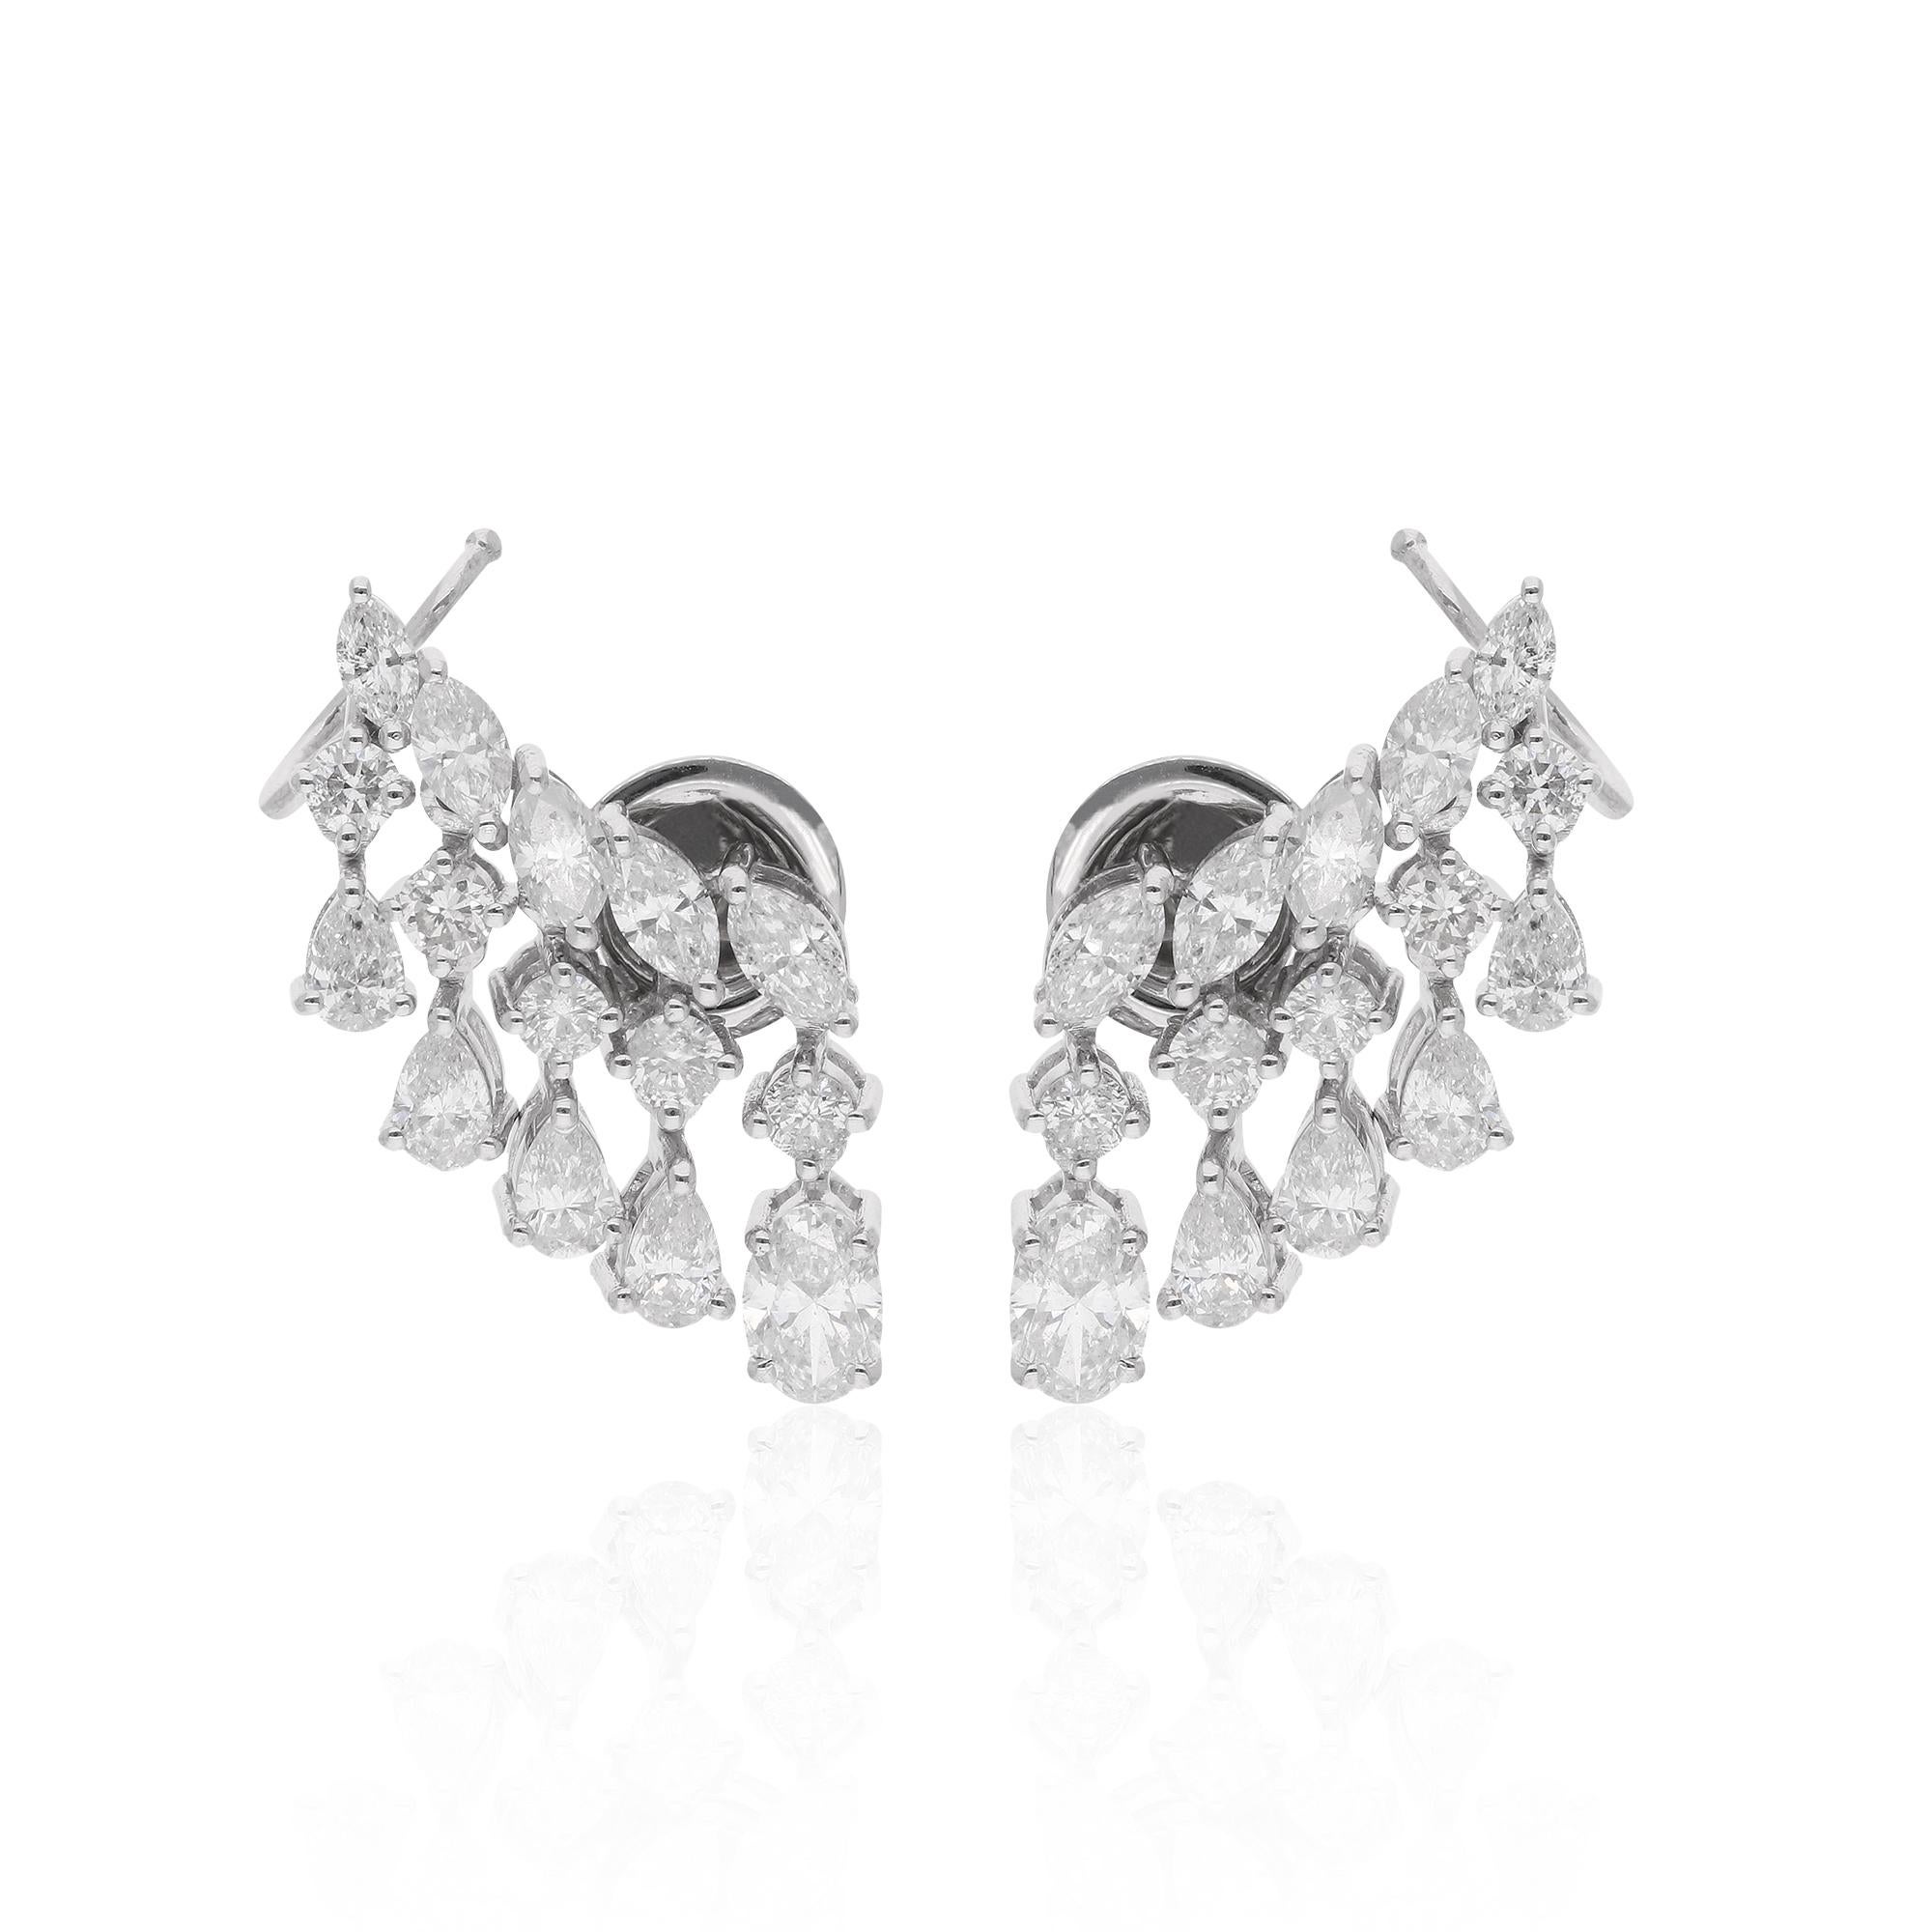 Crafted with precision and attention to detail, these ear cuff earrings are designed to hug the earlobe with comfort and security. The cuff design eliminates the need for traditional earring backs, making them easy to wear and perfect for those